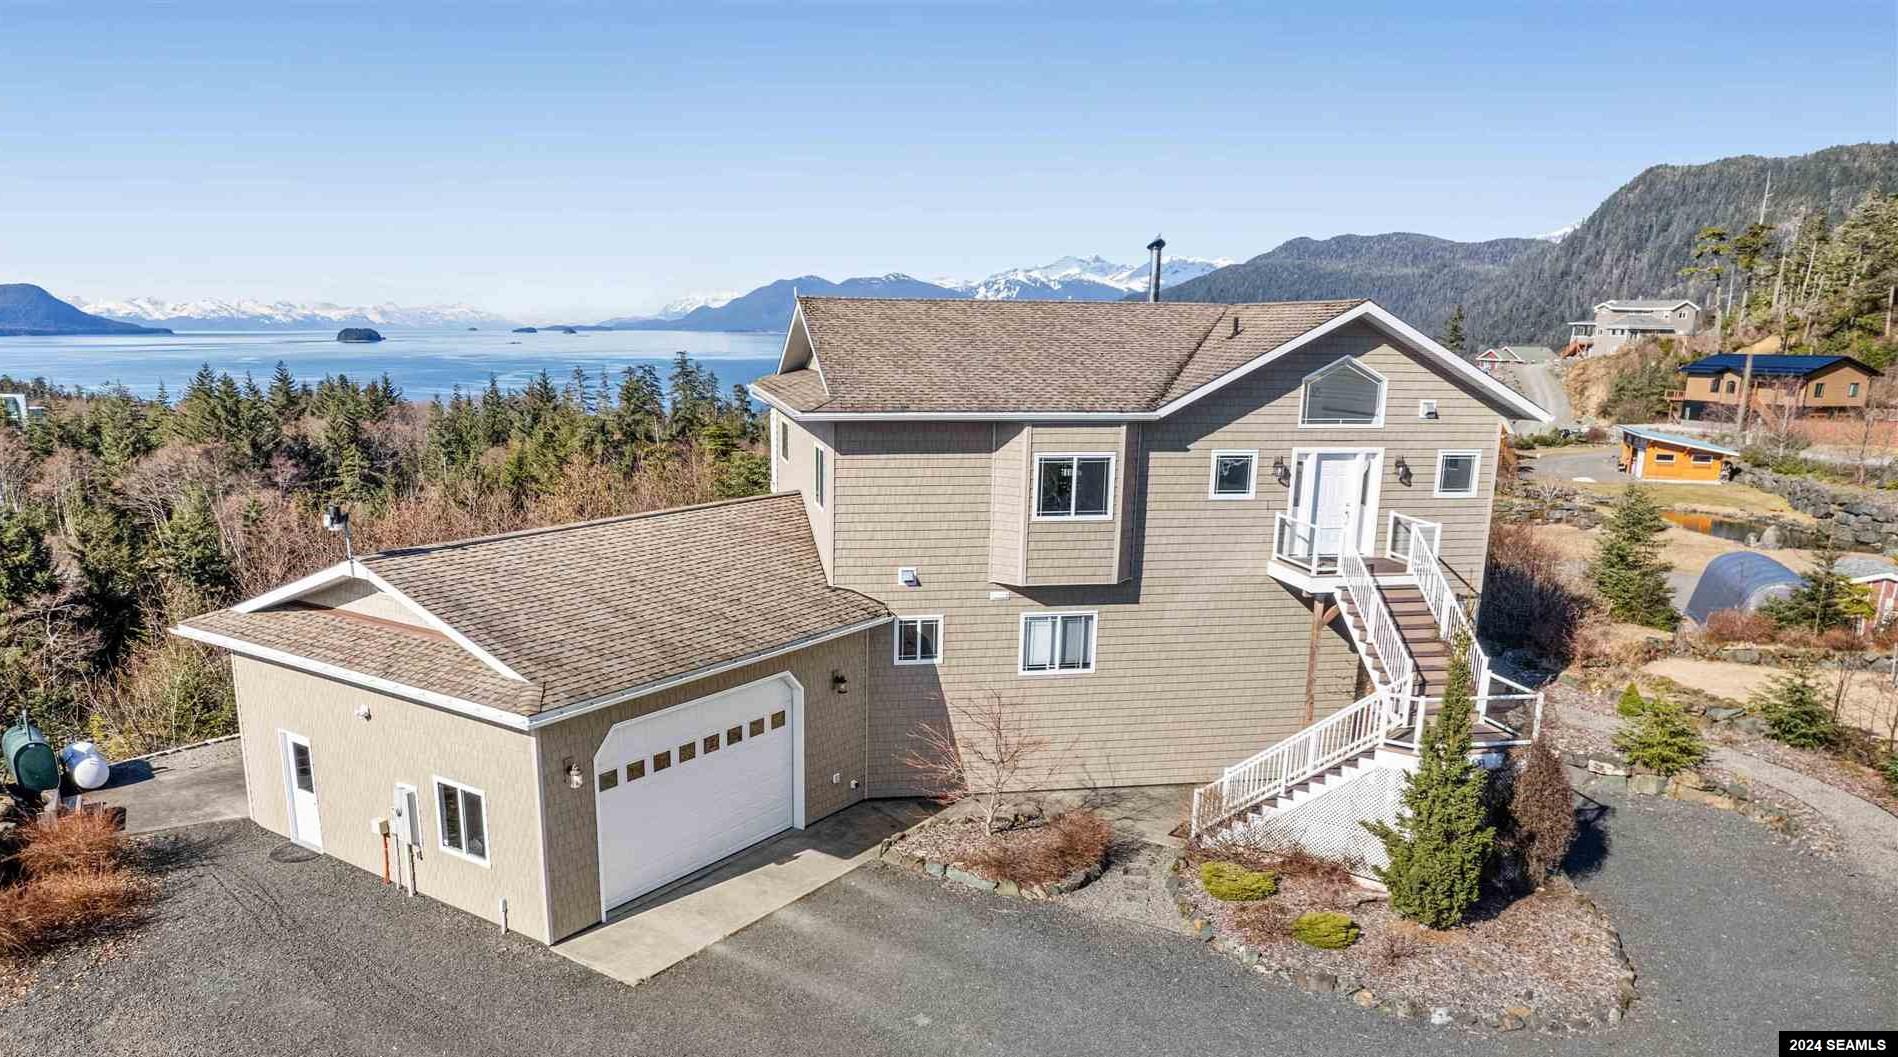 17009 Island View Drive, Juneau, AK 99801, 4 Bedrooms Bedrooms, ,3.5 BathroomsBathrooms,Residential,For Sale,Island View Drive,24181